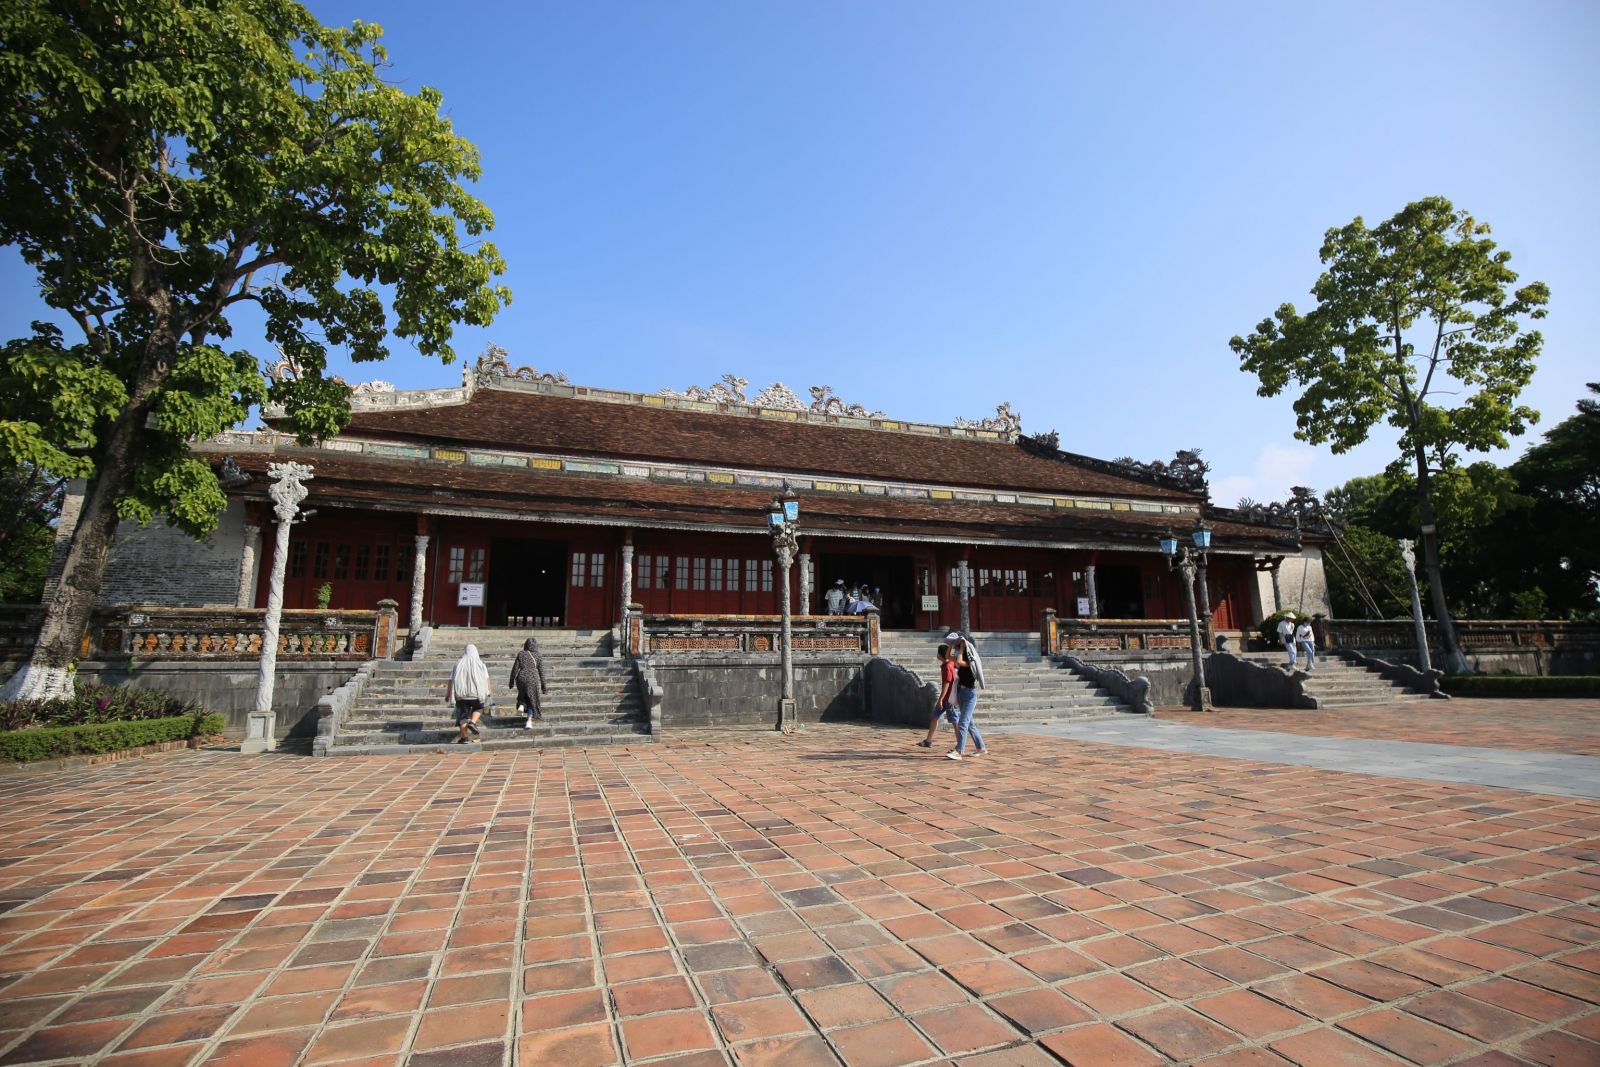 Hue: Tickets to heritage sites discounted to 50% to stimulate tourism post-COVID-19